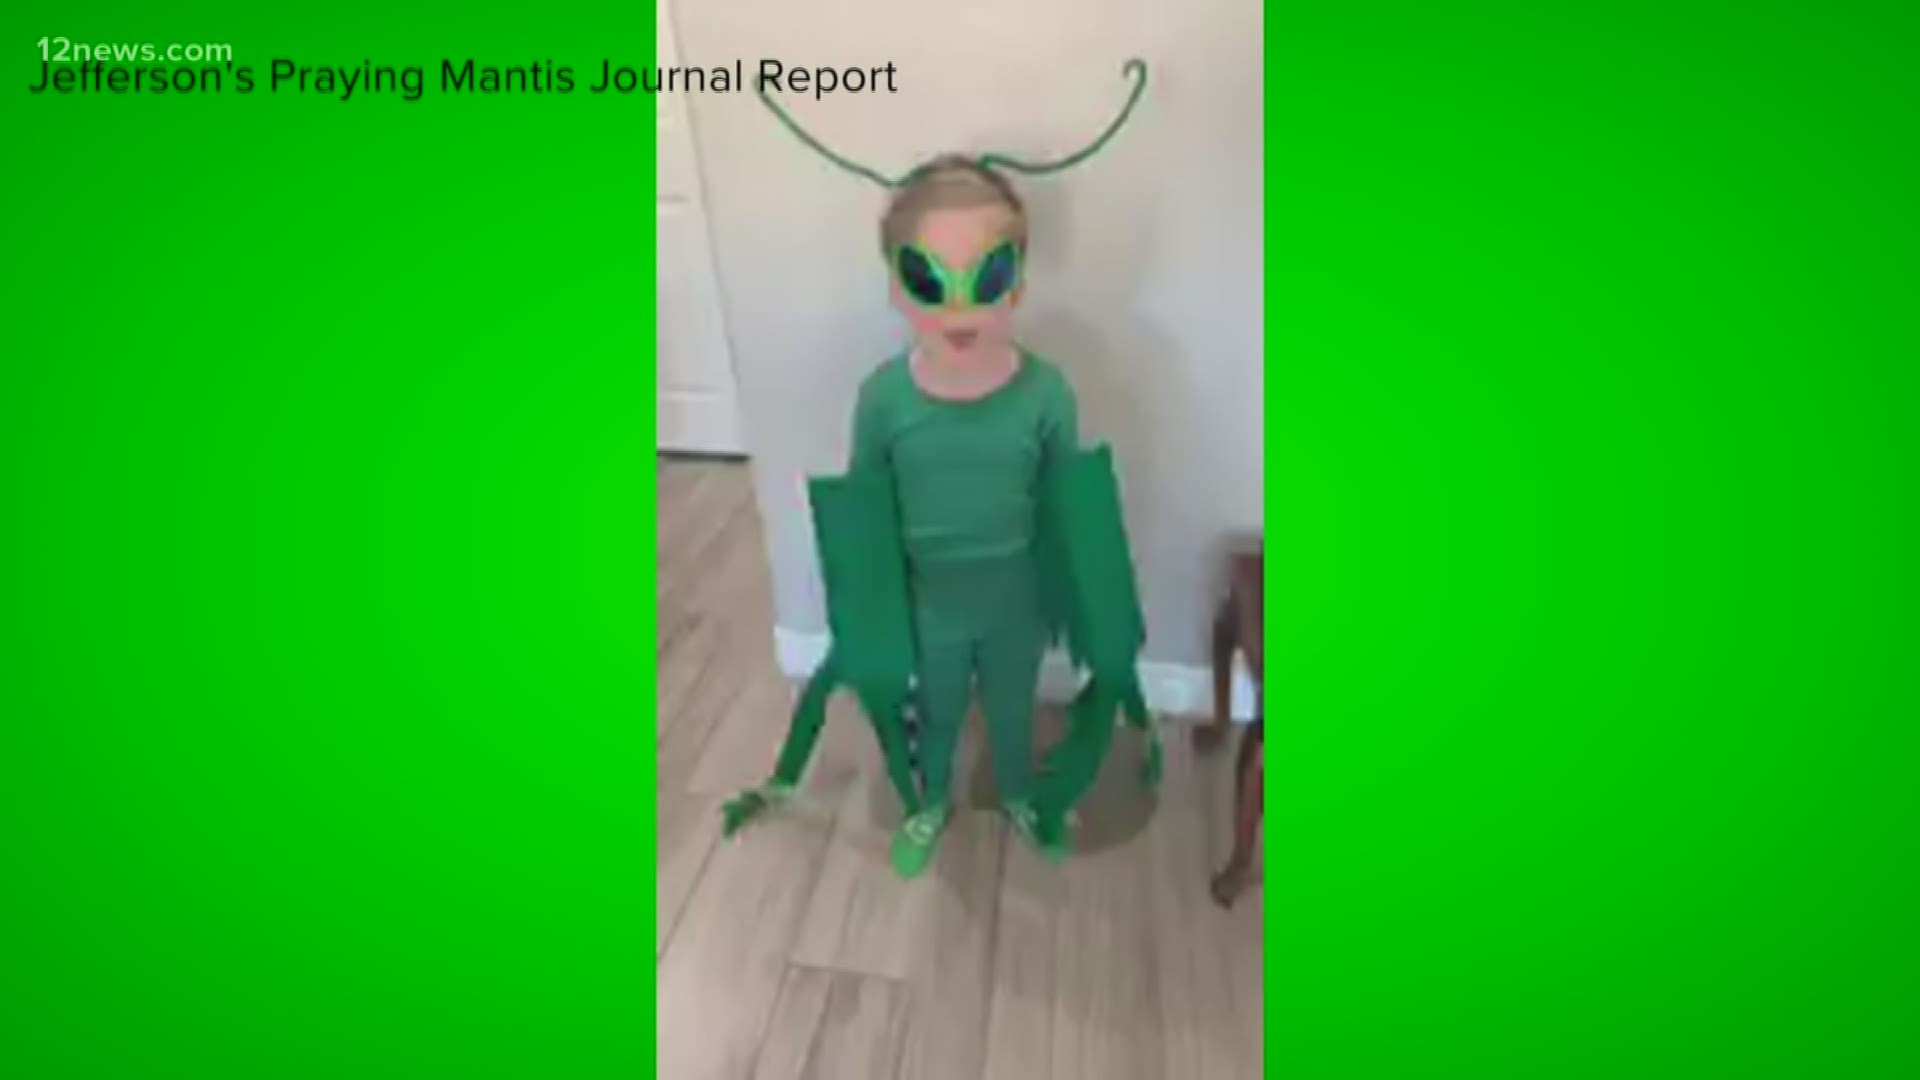 5-year-old Jefferson knows a lot about the praying mantis. And he is enthusiastically sharing his knowledge with the world through Facebook.